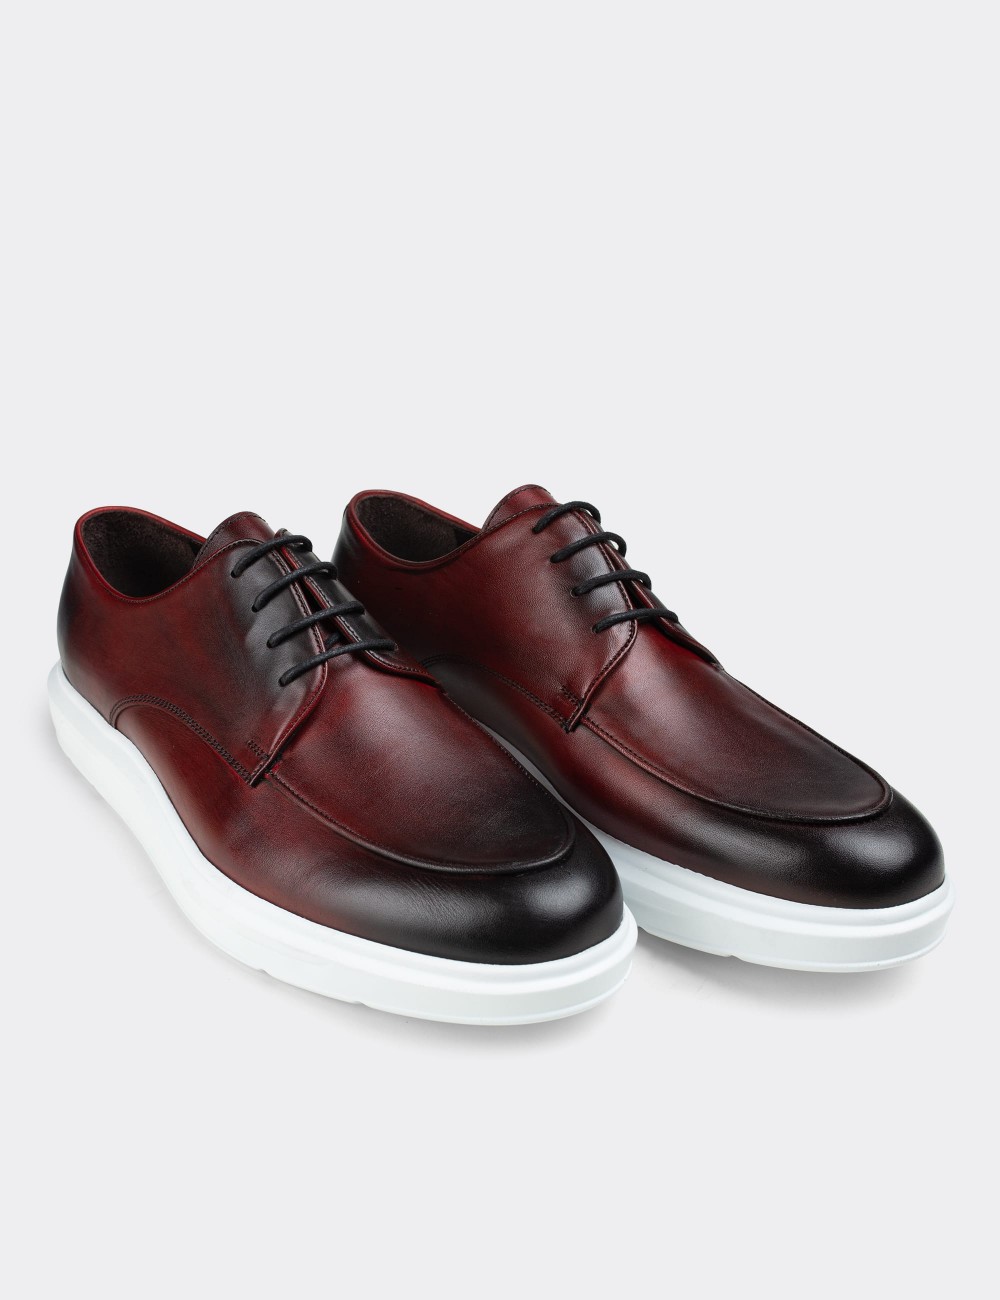 Burgundy  Leather Lace-up Shoes - 01841MBRDP01